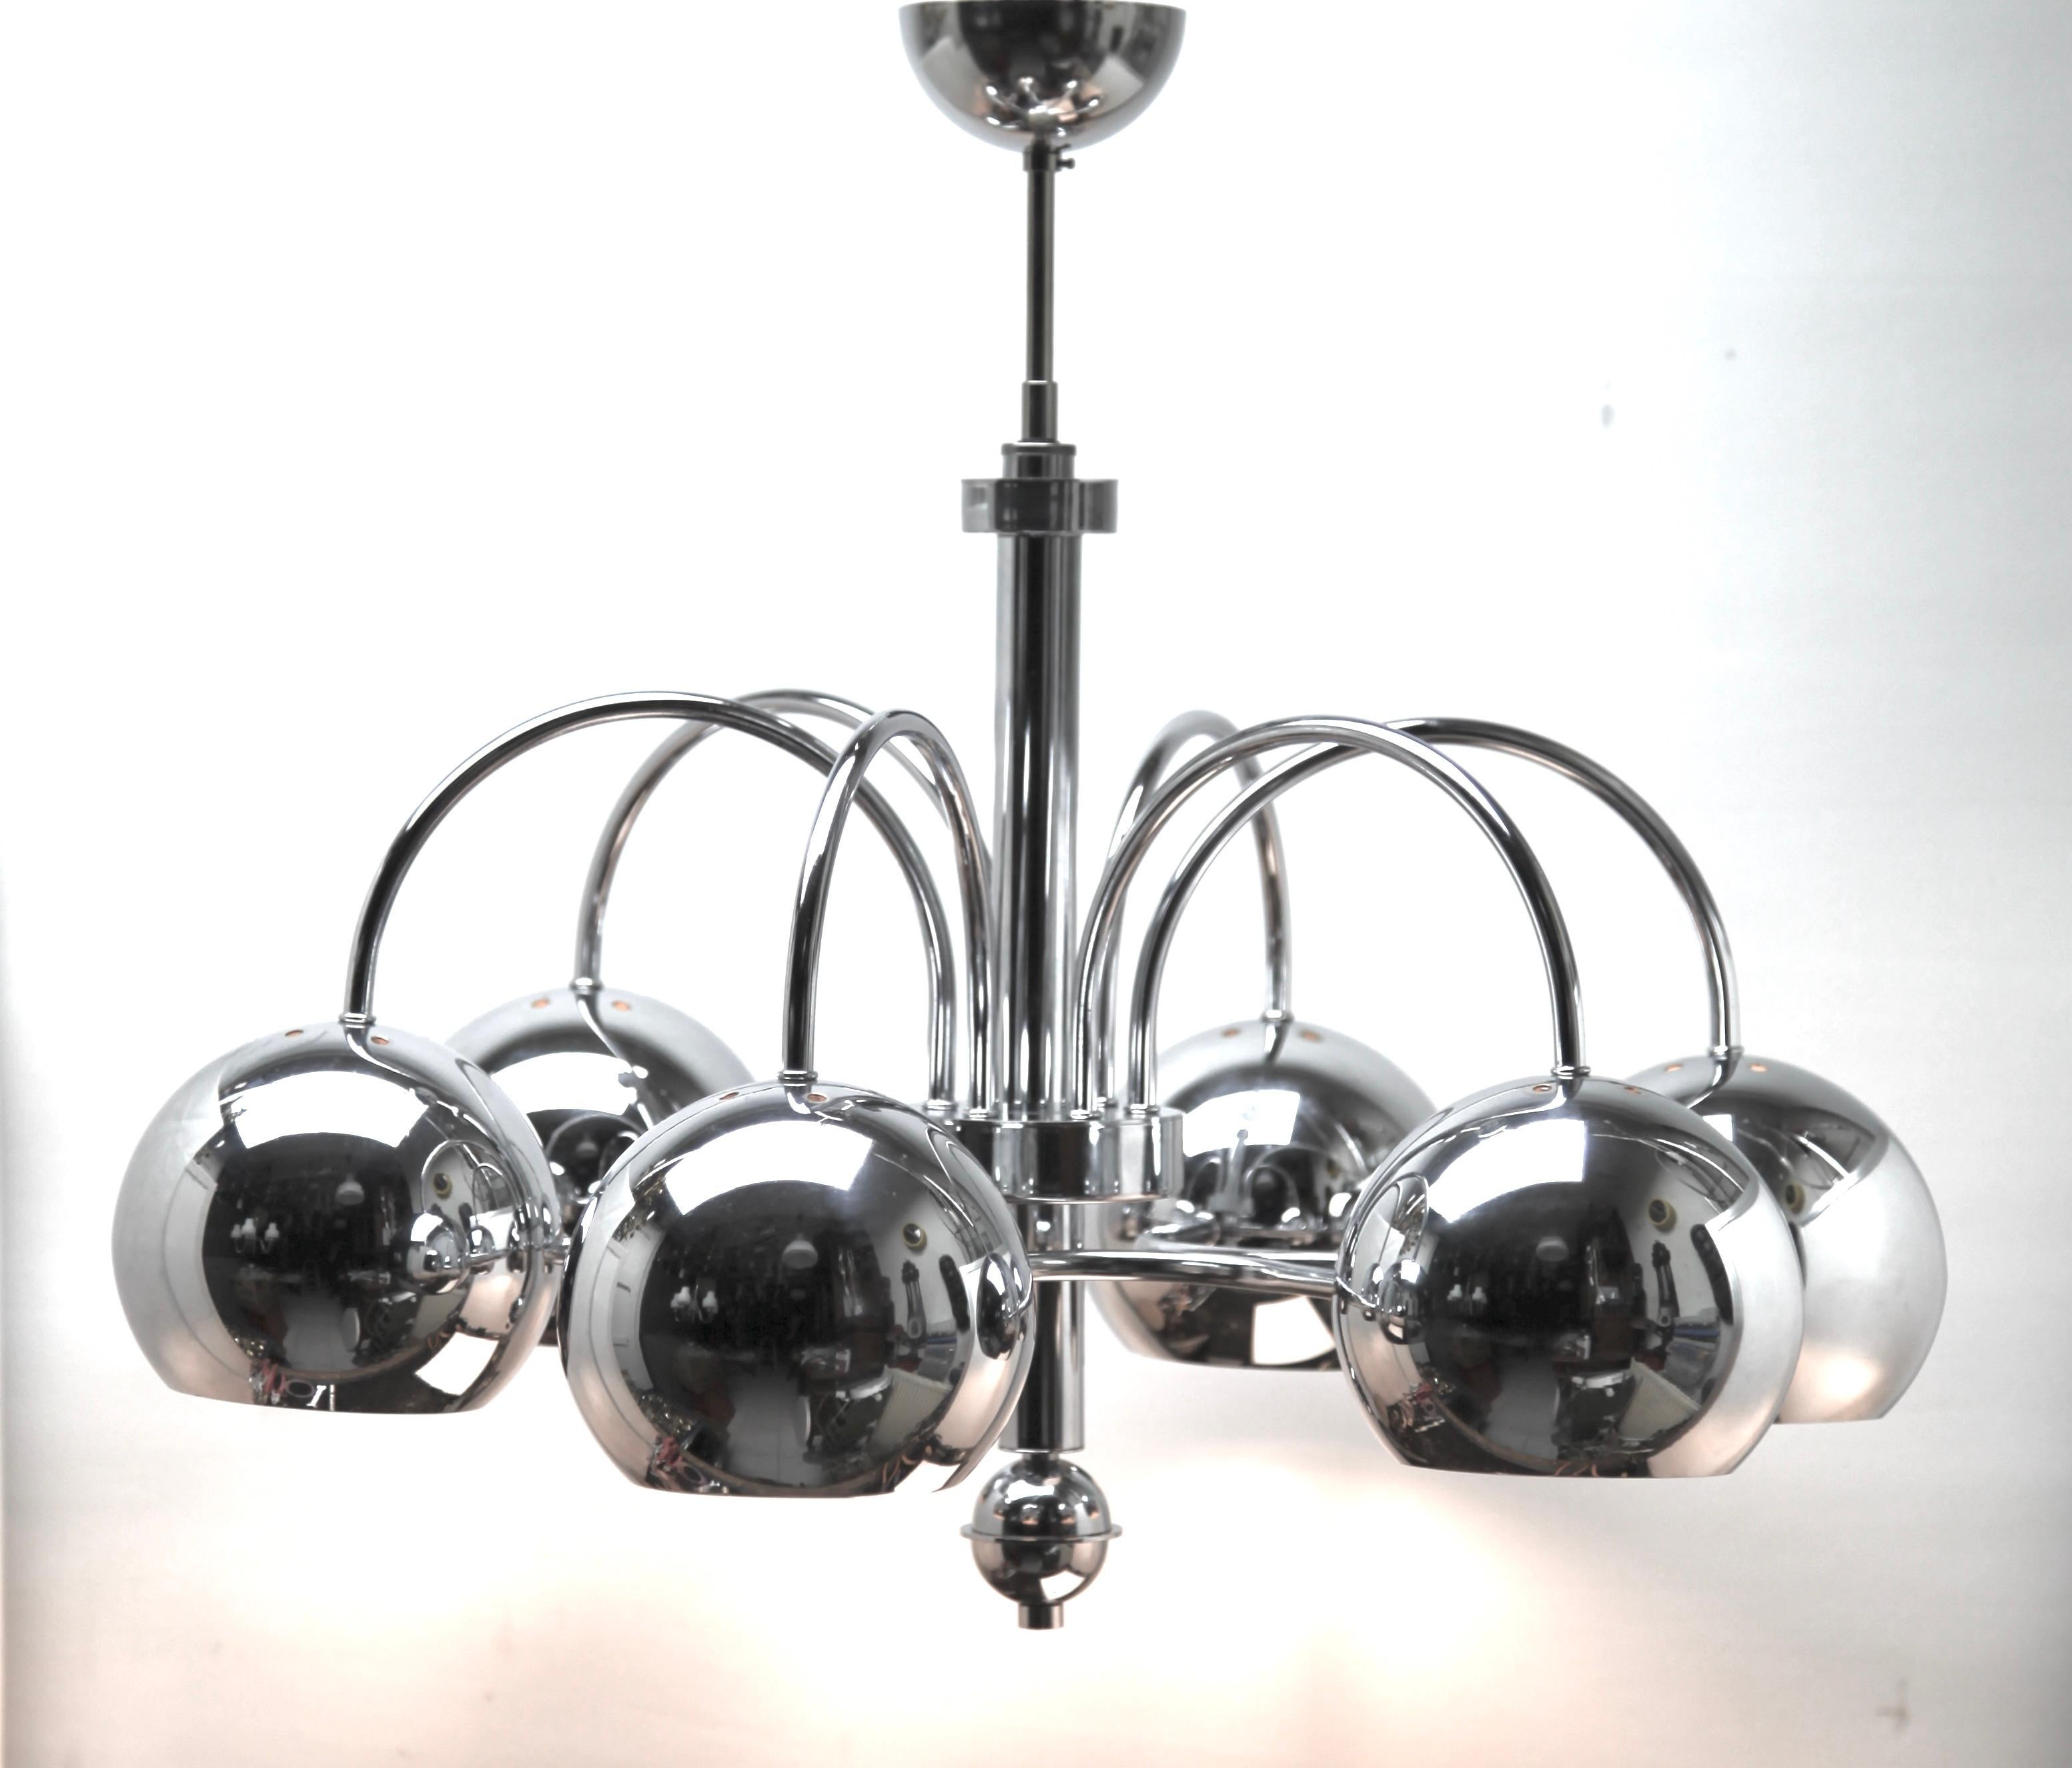 Ceiling lamp with 6 Eyeball Lights Goffredo Reggiani, 1970s

Solid, sturdy construction with great attention to detail.

Prime quality thick mid-century chrome.

Measures 23.62 inches tall.
Each eyeball is 5.51 inches in diameter.

This